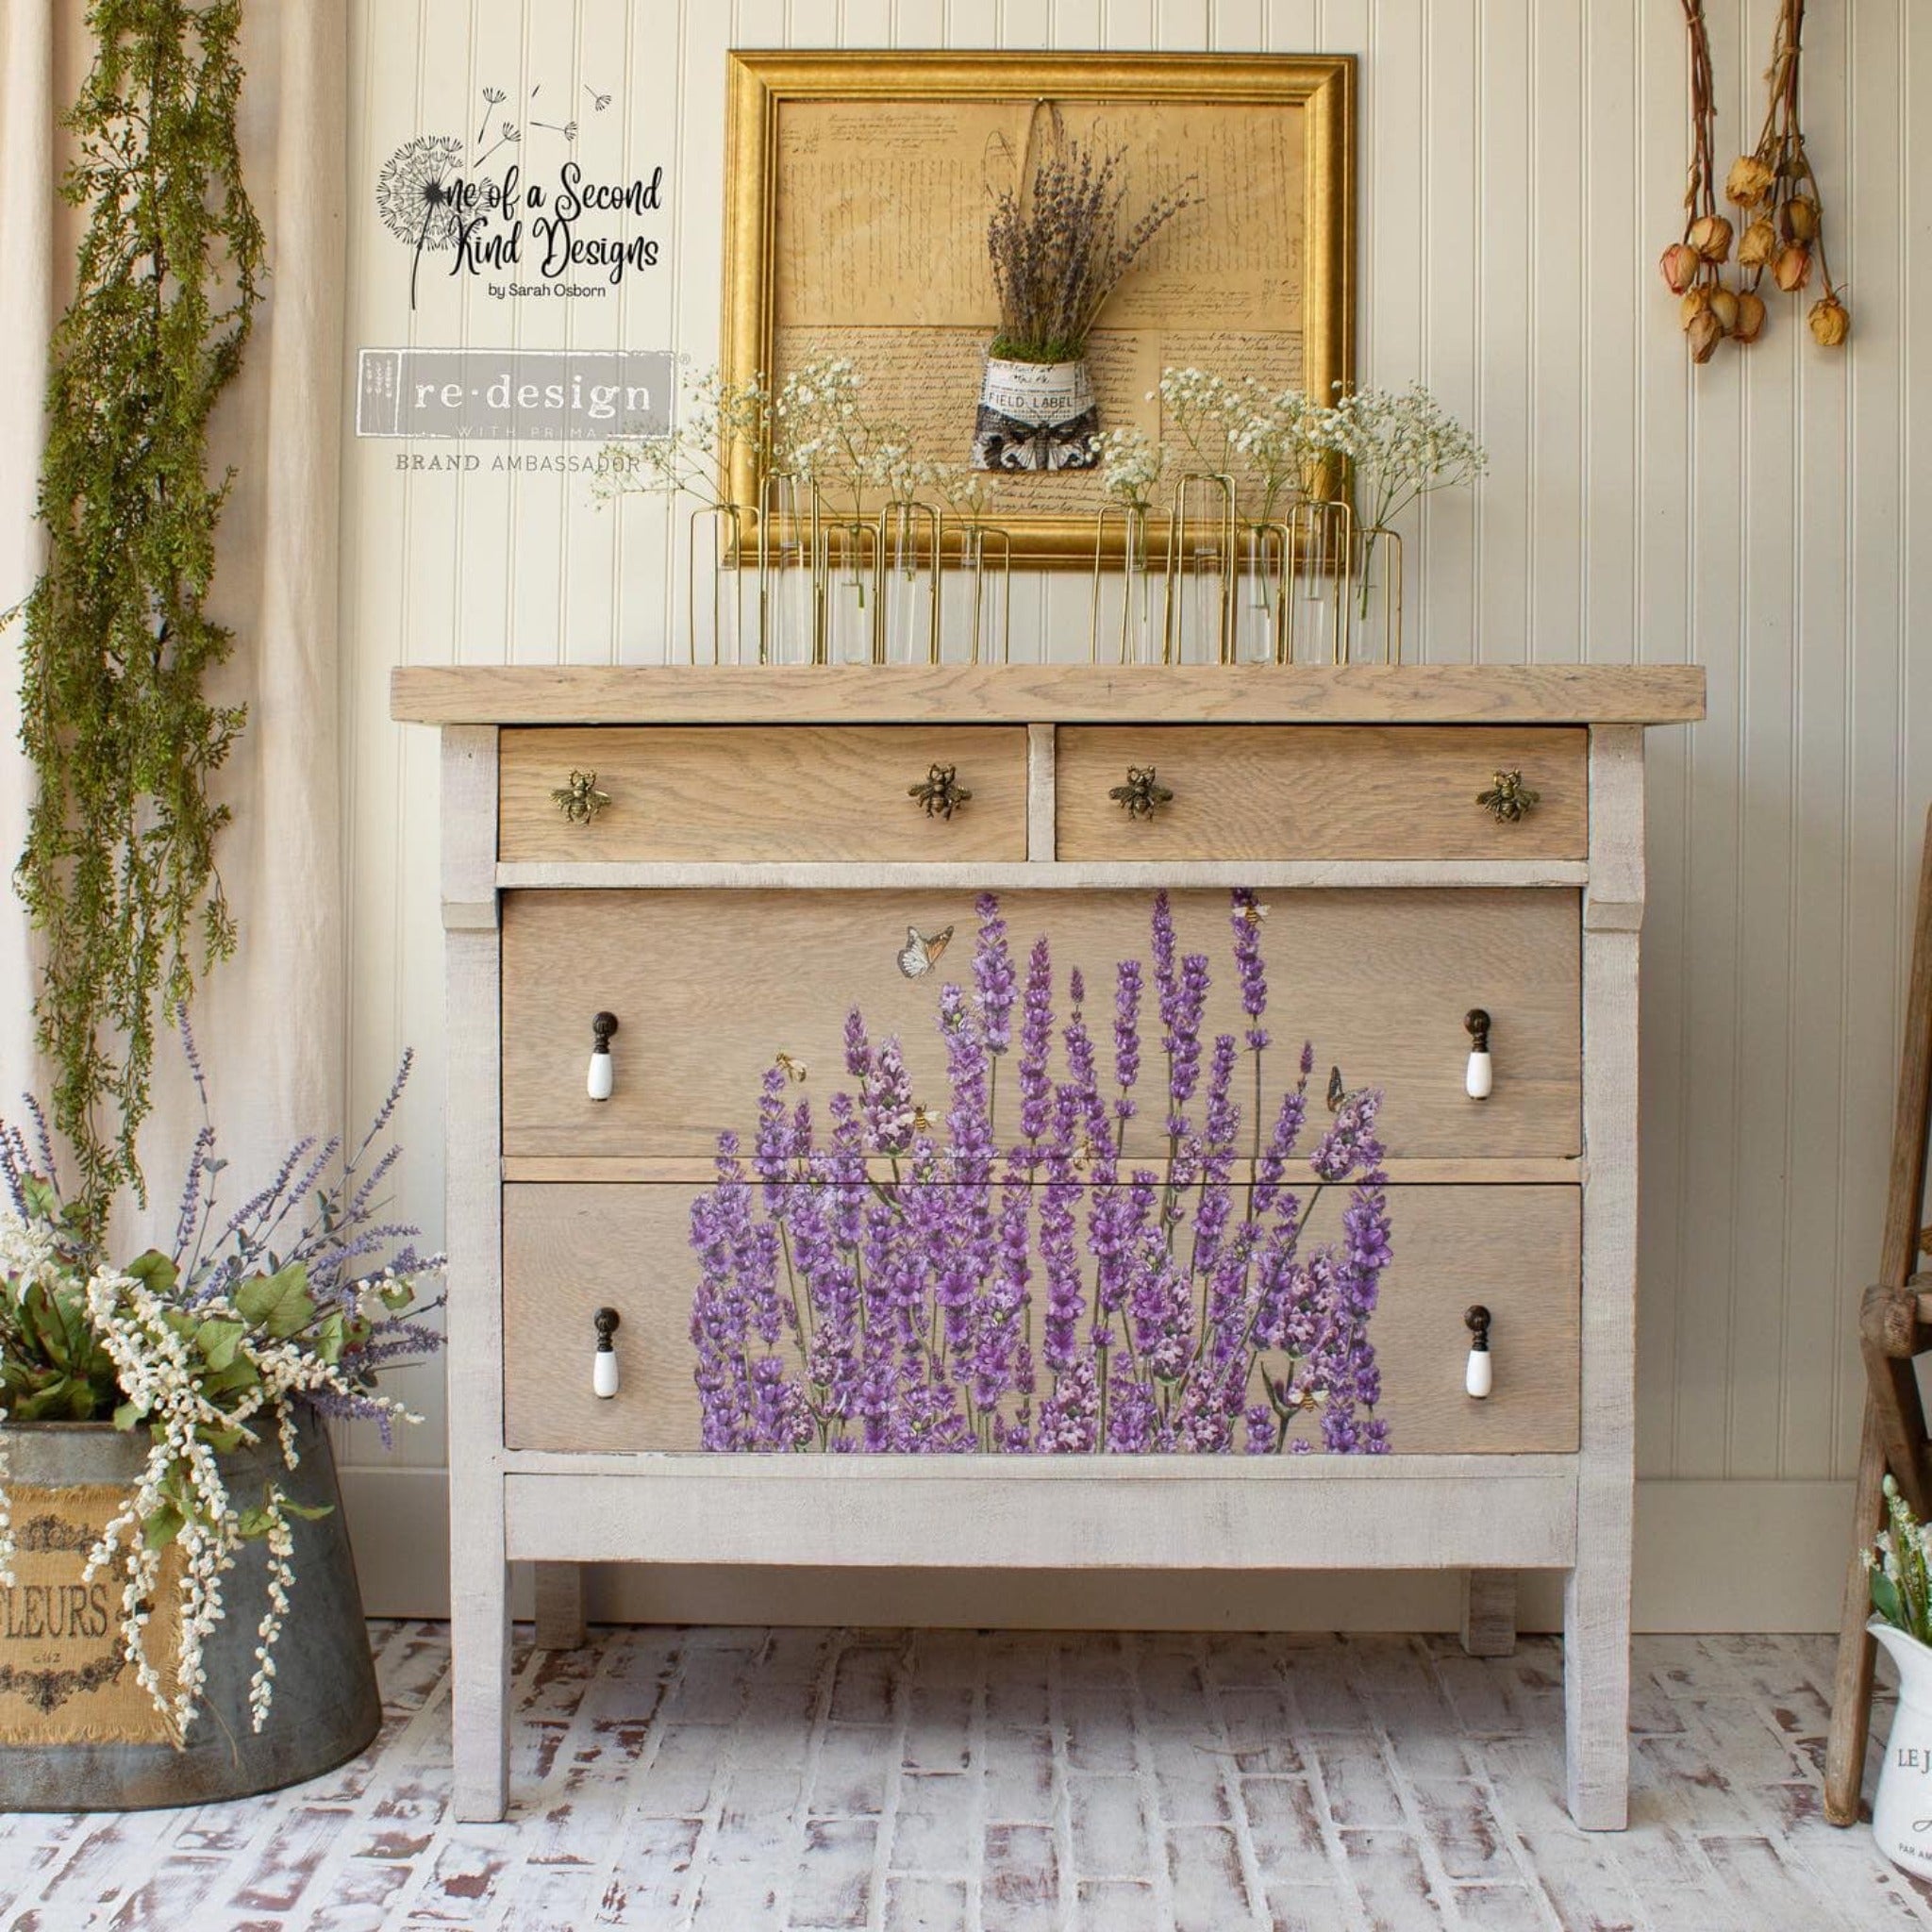 A natural light wood dresser refurbished by One of a Second Kind Designs features ReDesign with Prima's Champs de Lavende transfer on its 2 bottom drawers.